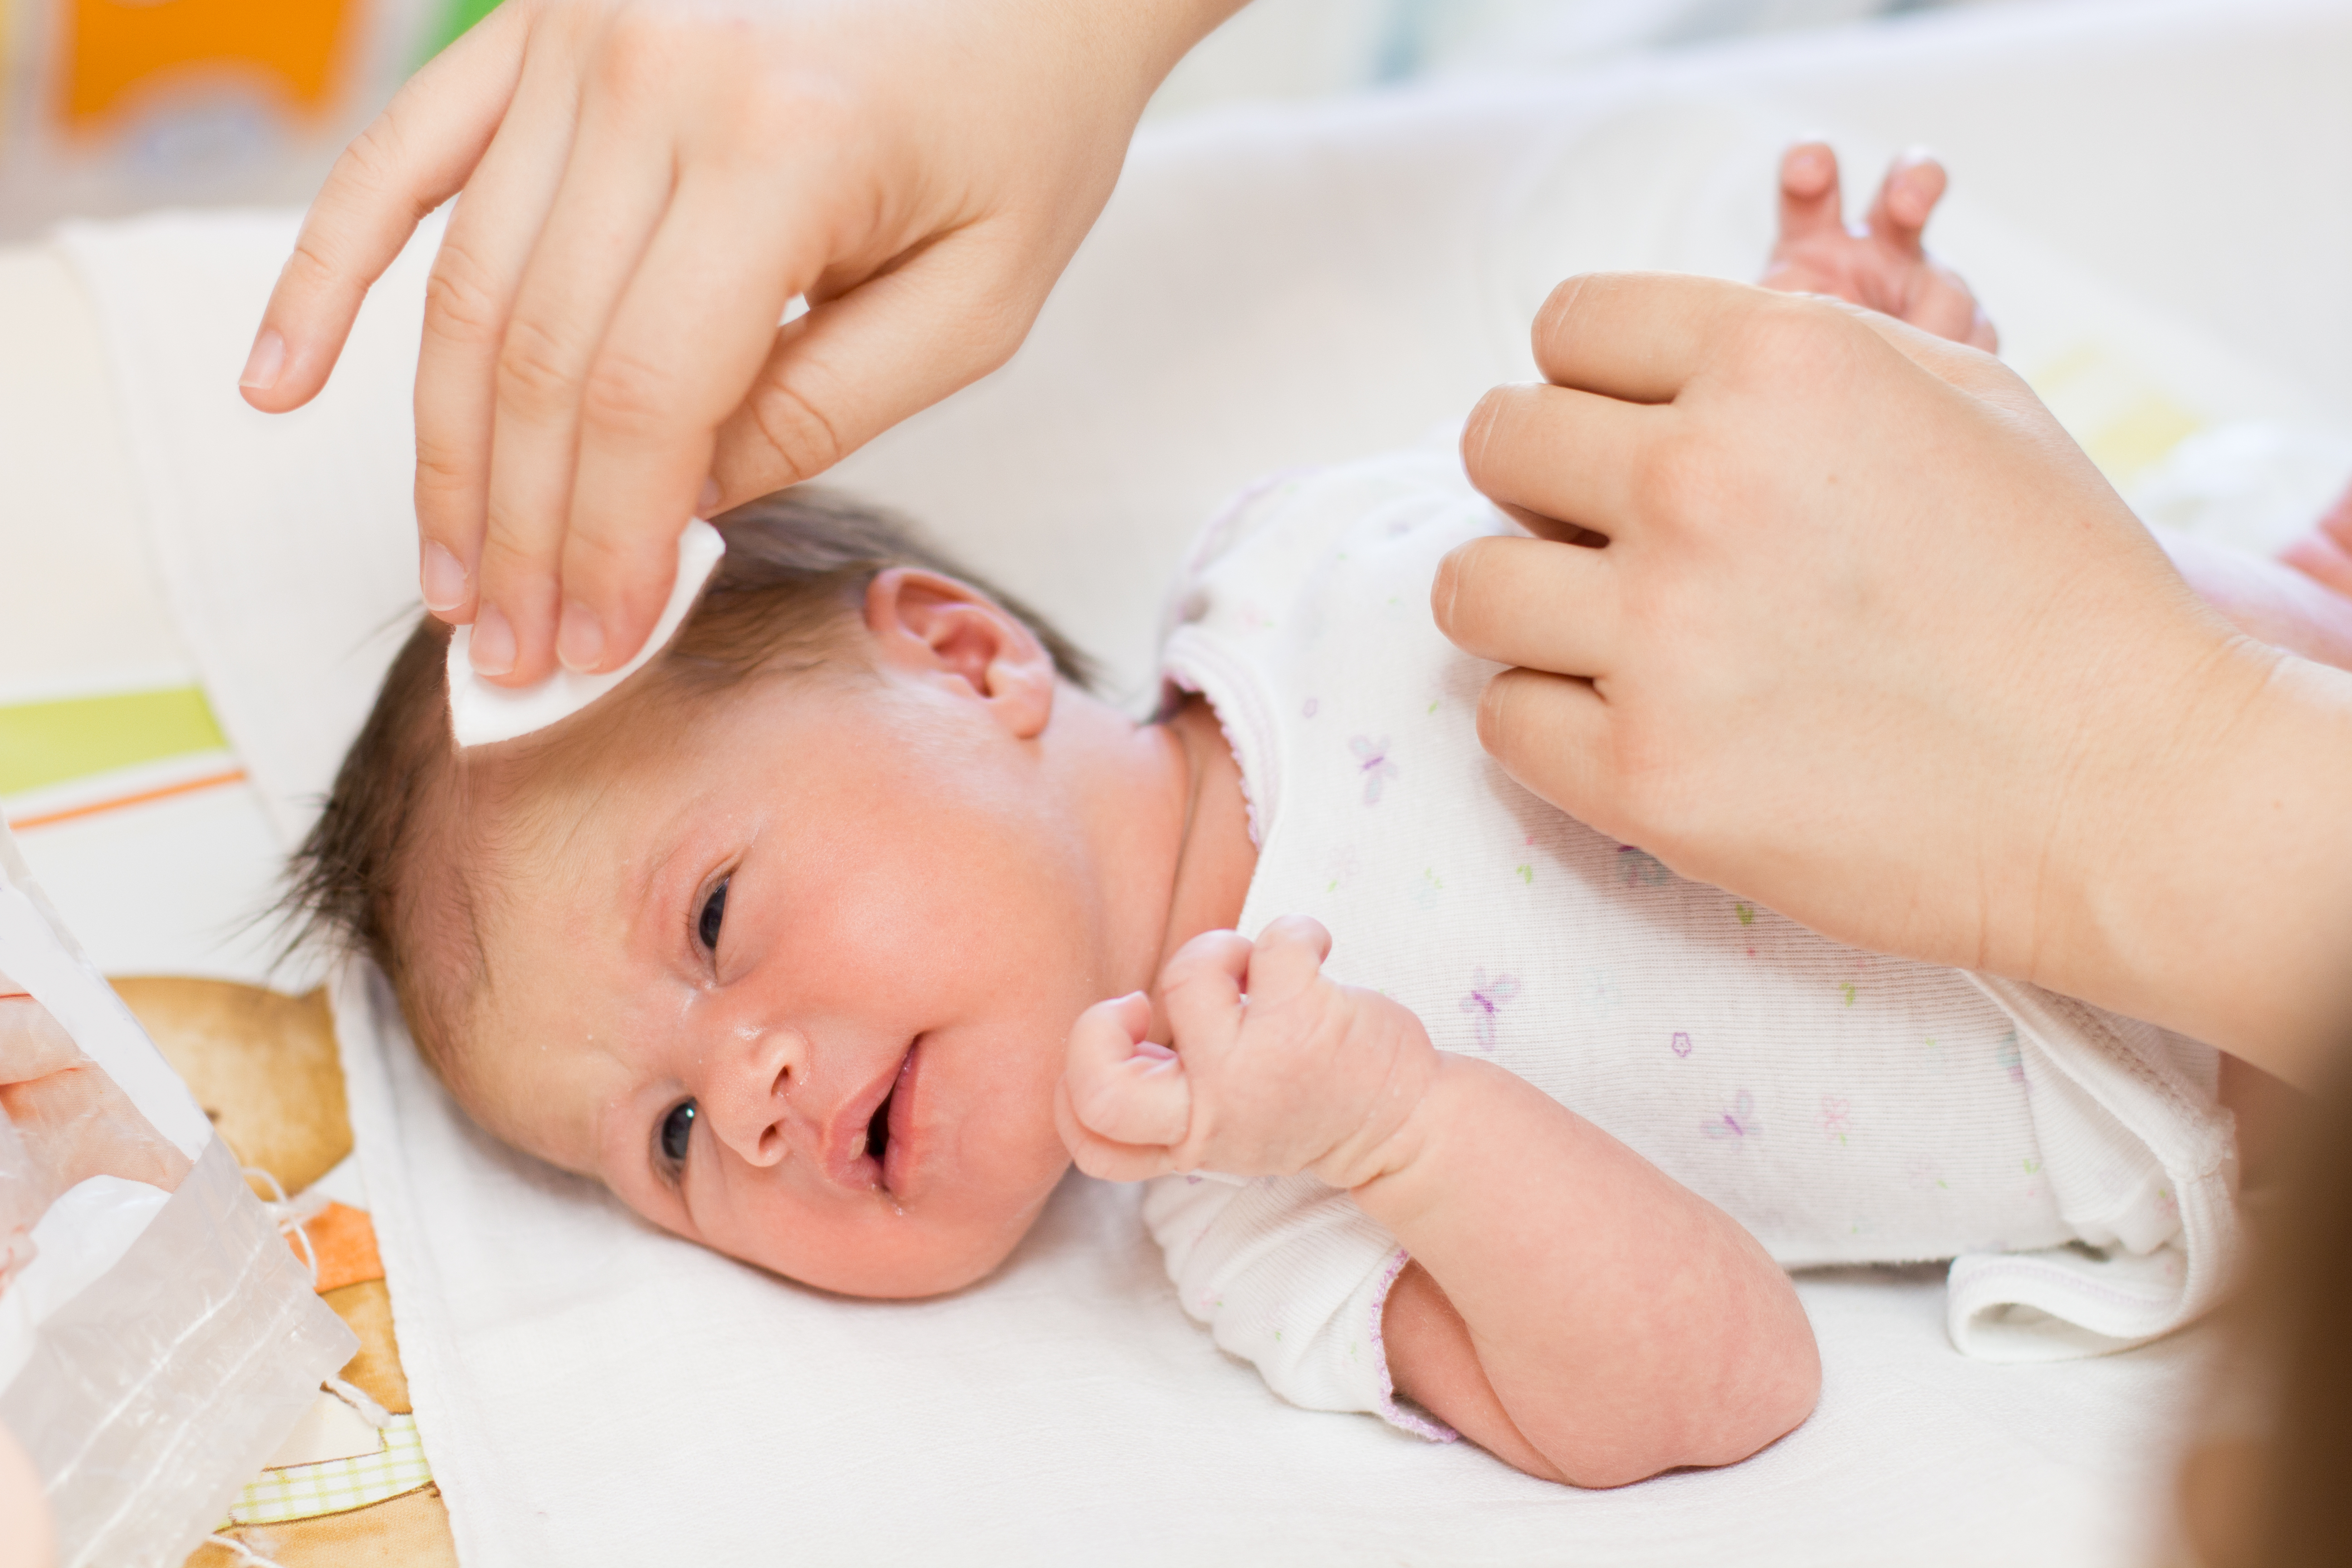 common baby skin ailments and how to cure them - baby mum-mum blog